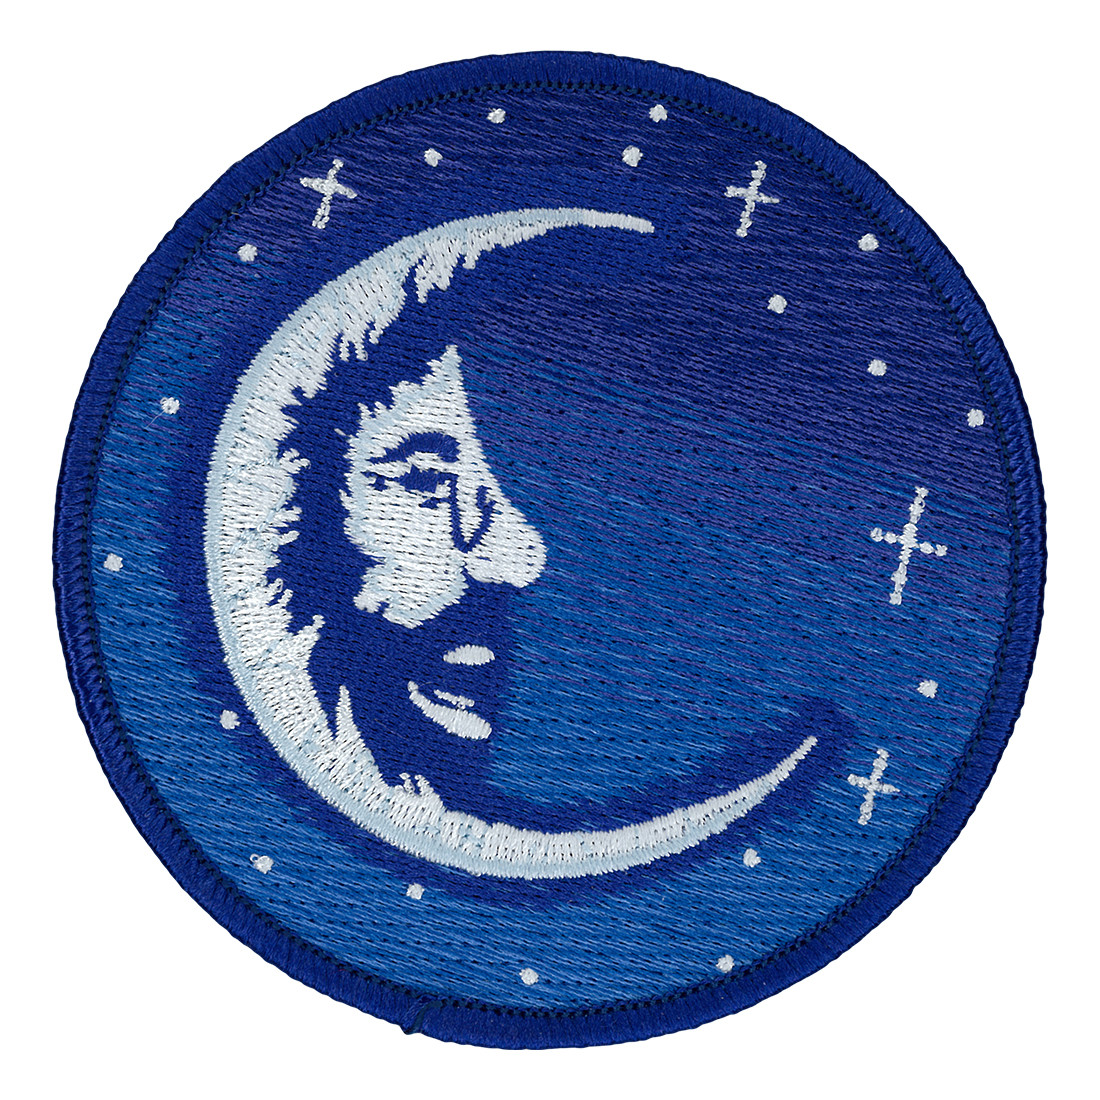 Jerry Moon Patch